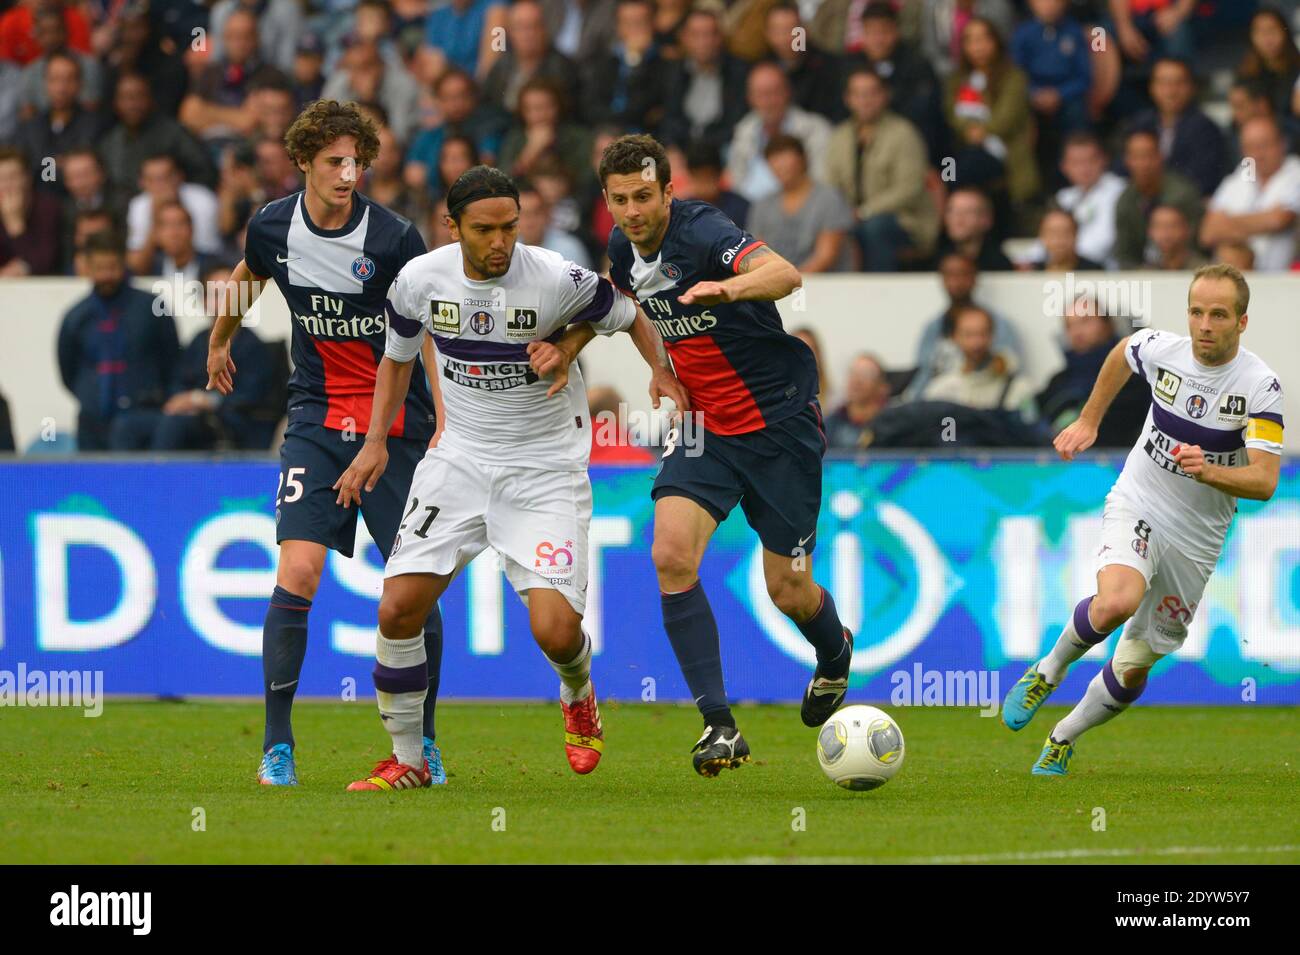 PSG's Thiago Motta battling Toulouse's Abel Aguilar during the French First League soccer match, PSG vs Toulouse in Paris, France, on September 28th, 2013. PSG won 2-0. Photo by Henri Szwarc/ABACAPRESS.COM Stock Photo